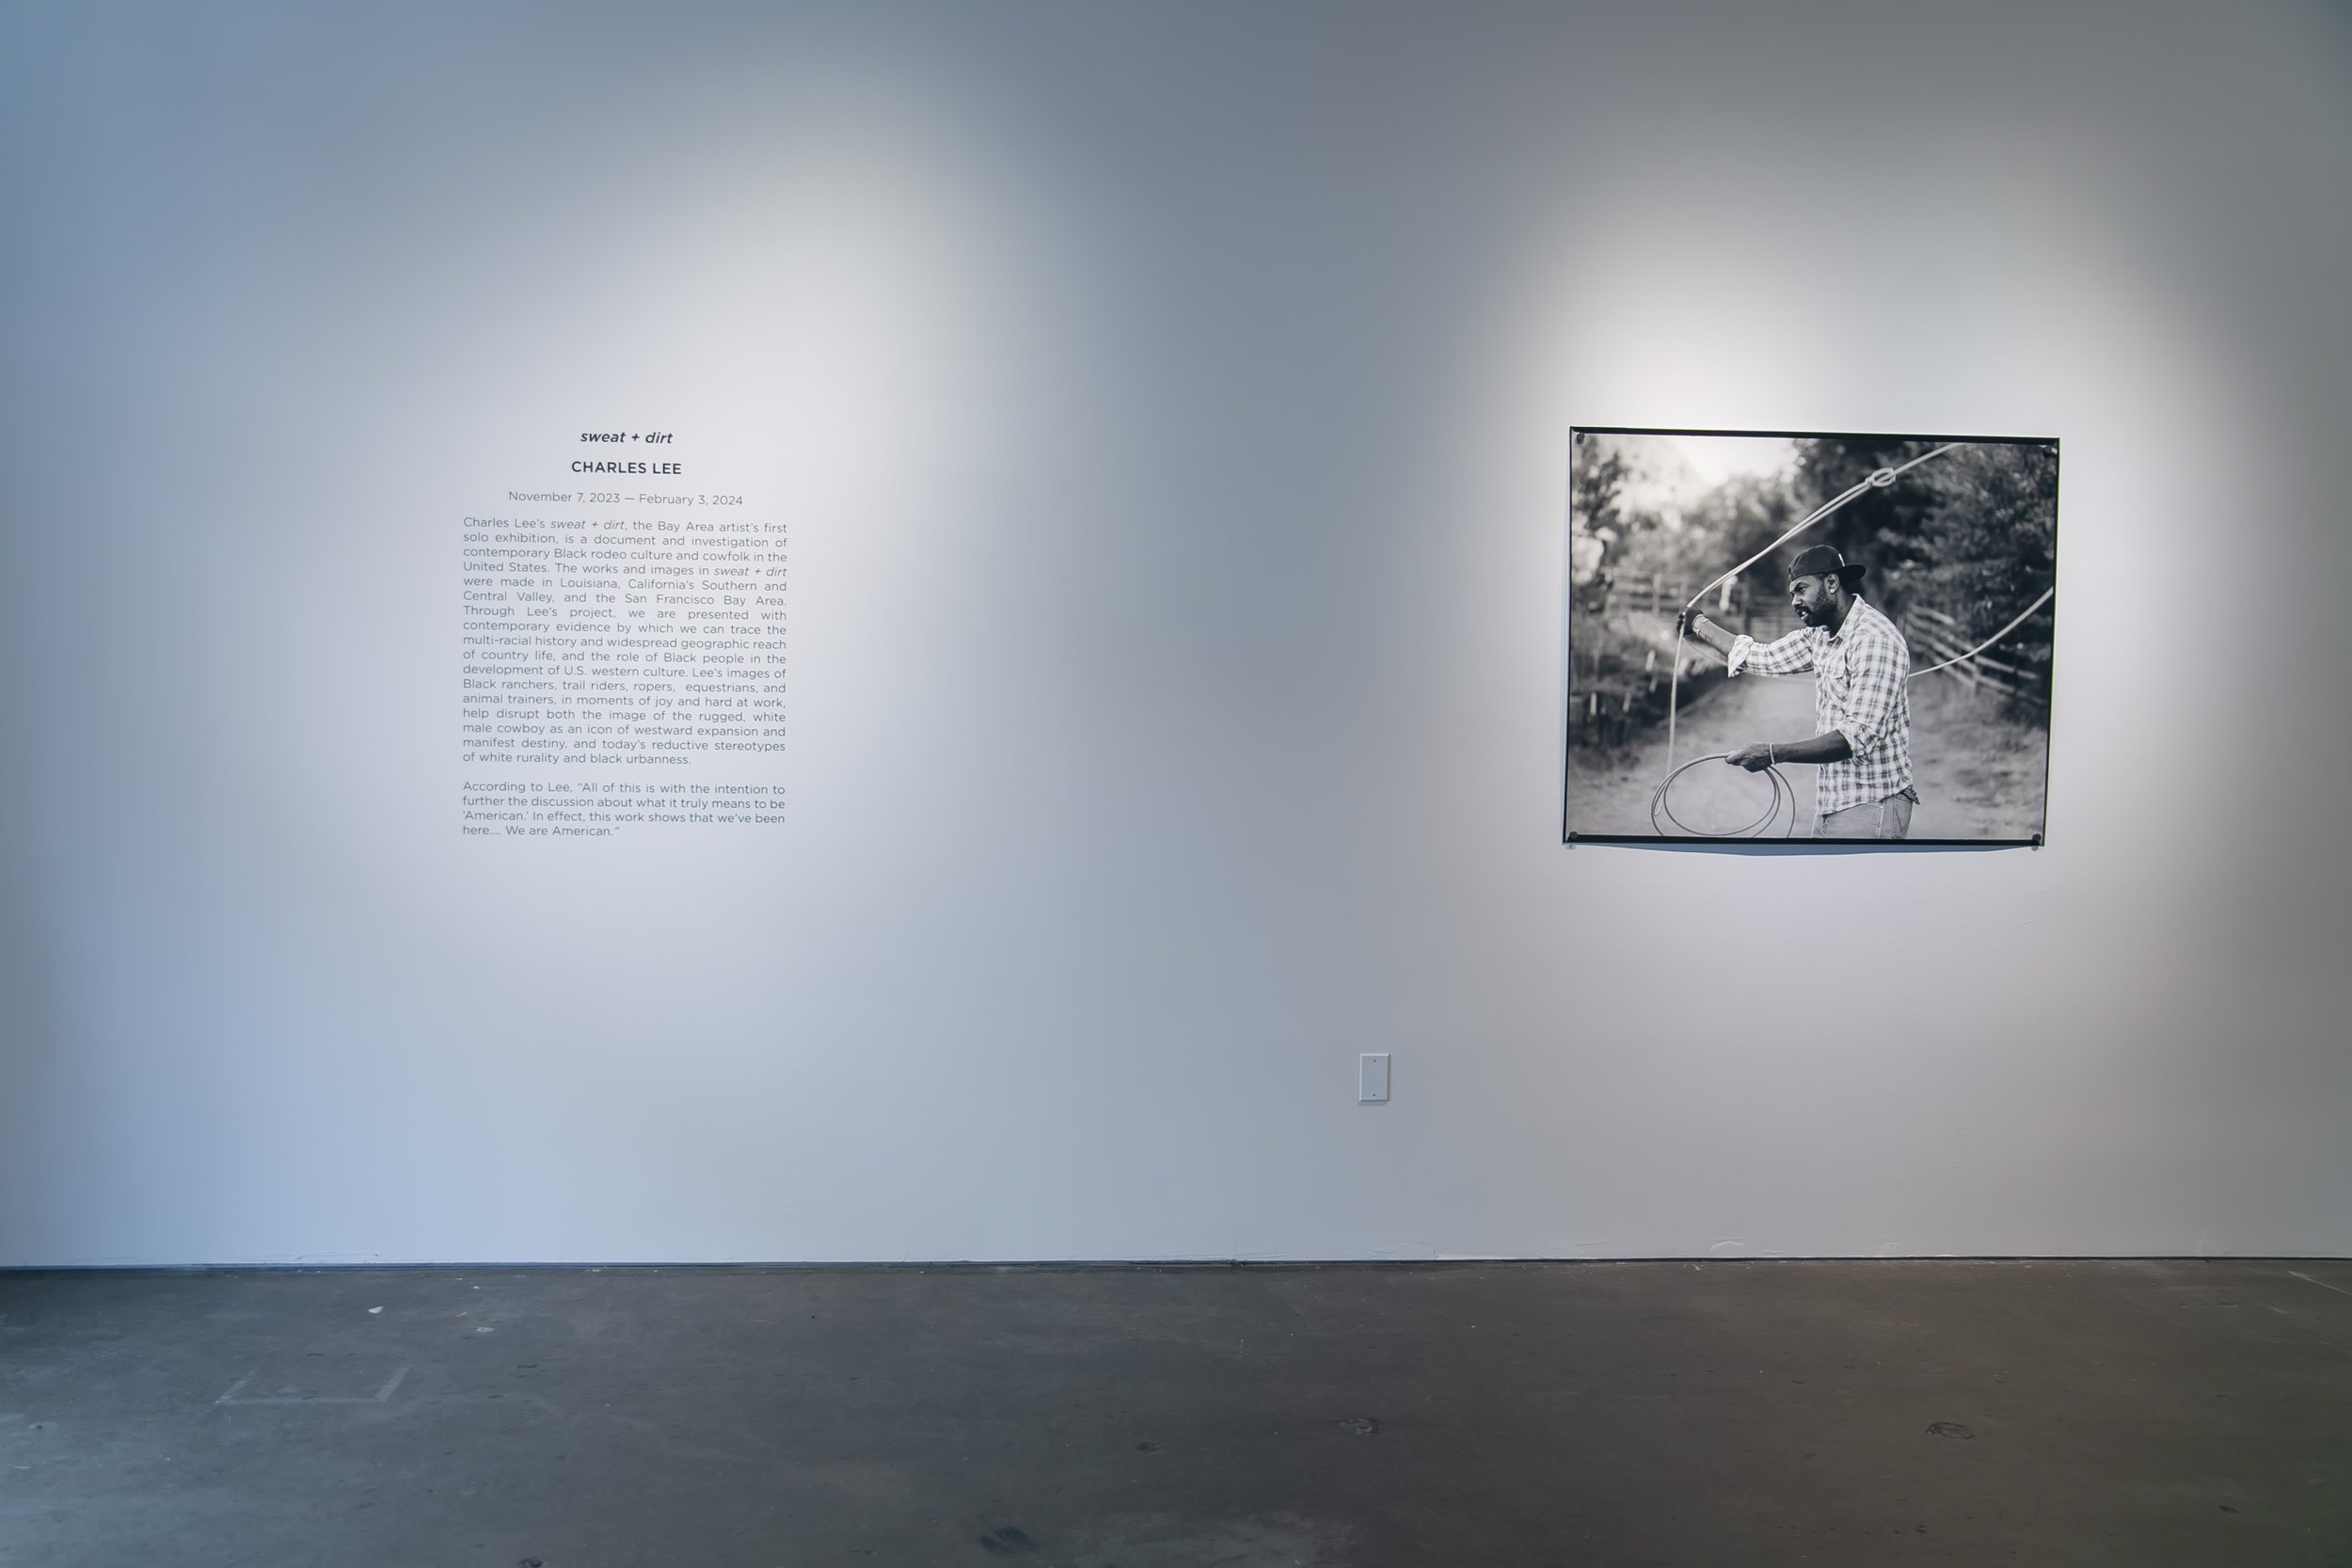 Installation view of Charles Lee’s solo exhibition sweat + dirt  by Minoosh Zomorodinia. 